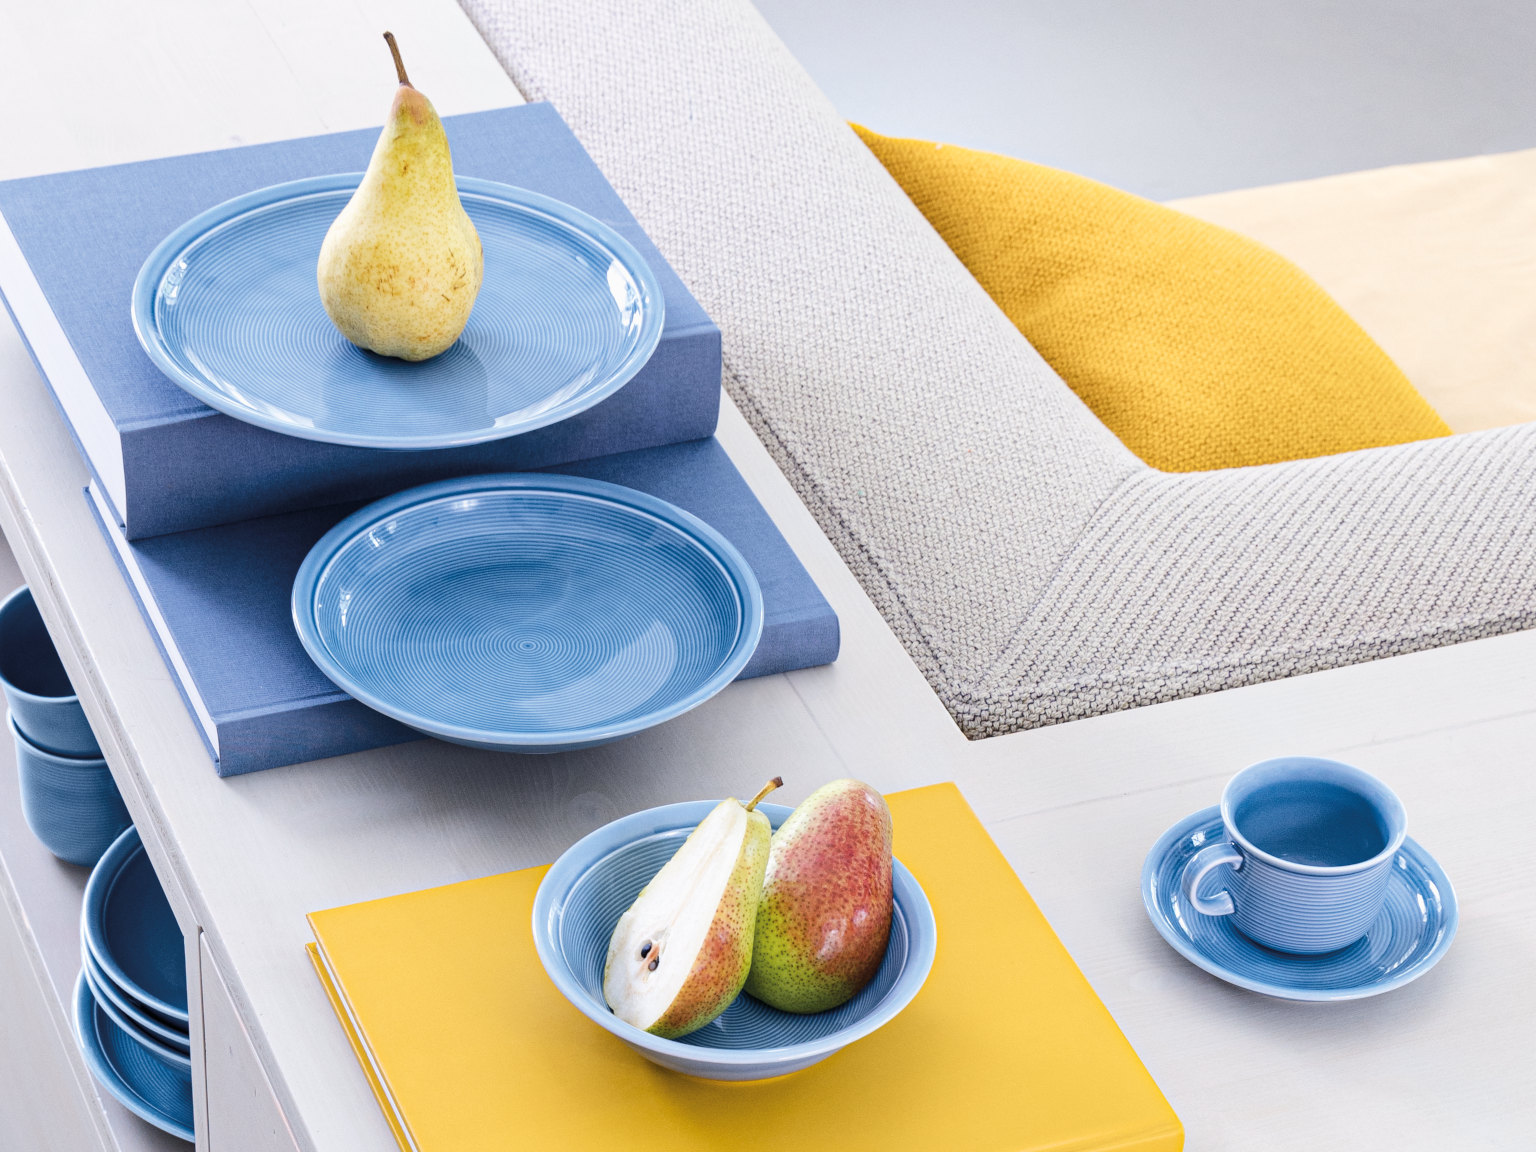 Thomas Trend Arctic Blue plates and cup decorated with peer and apples on a board